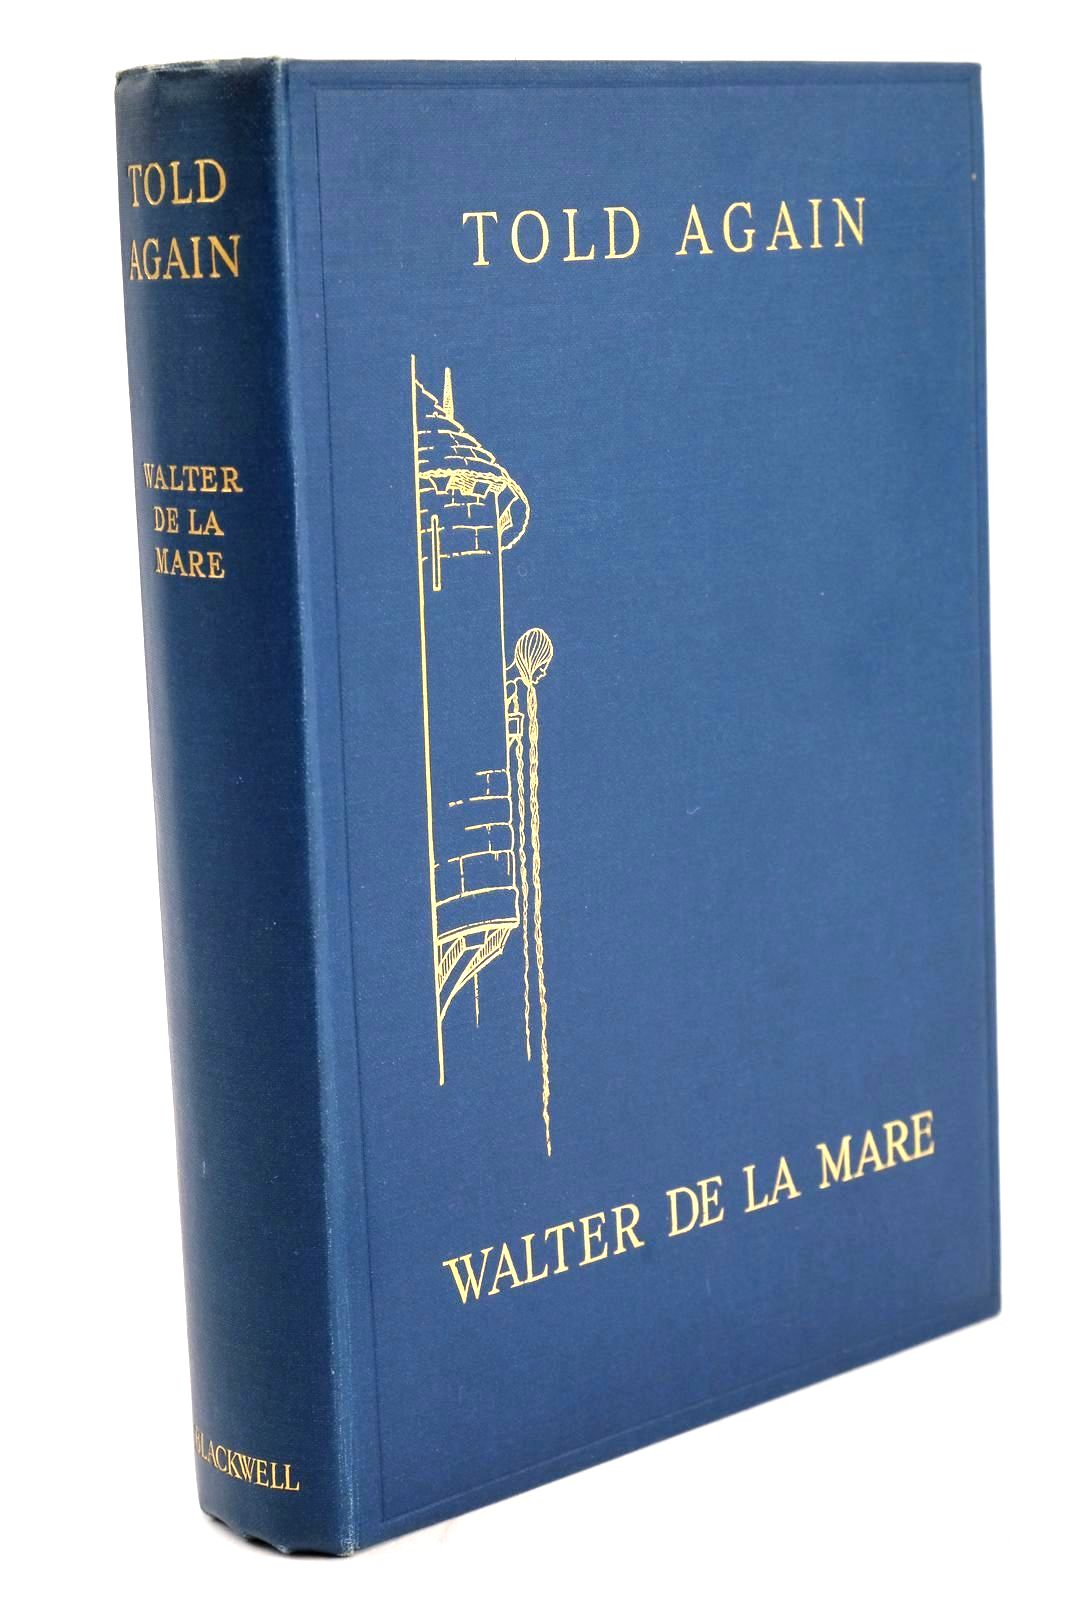 Photo of TOLD AGAIN written by De La Mare, Walter illustrated by Watson, A.H. published by Basil Blackwell (STOCK CODE: 1324223)  for sale by Stella & Rose's Books